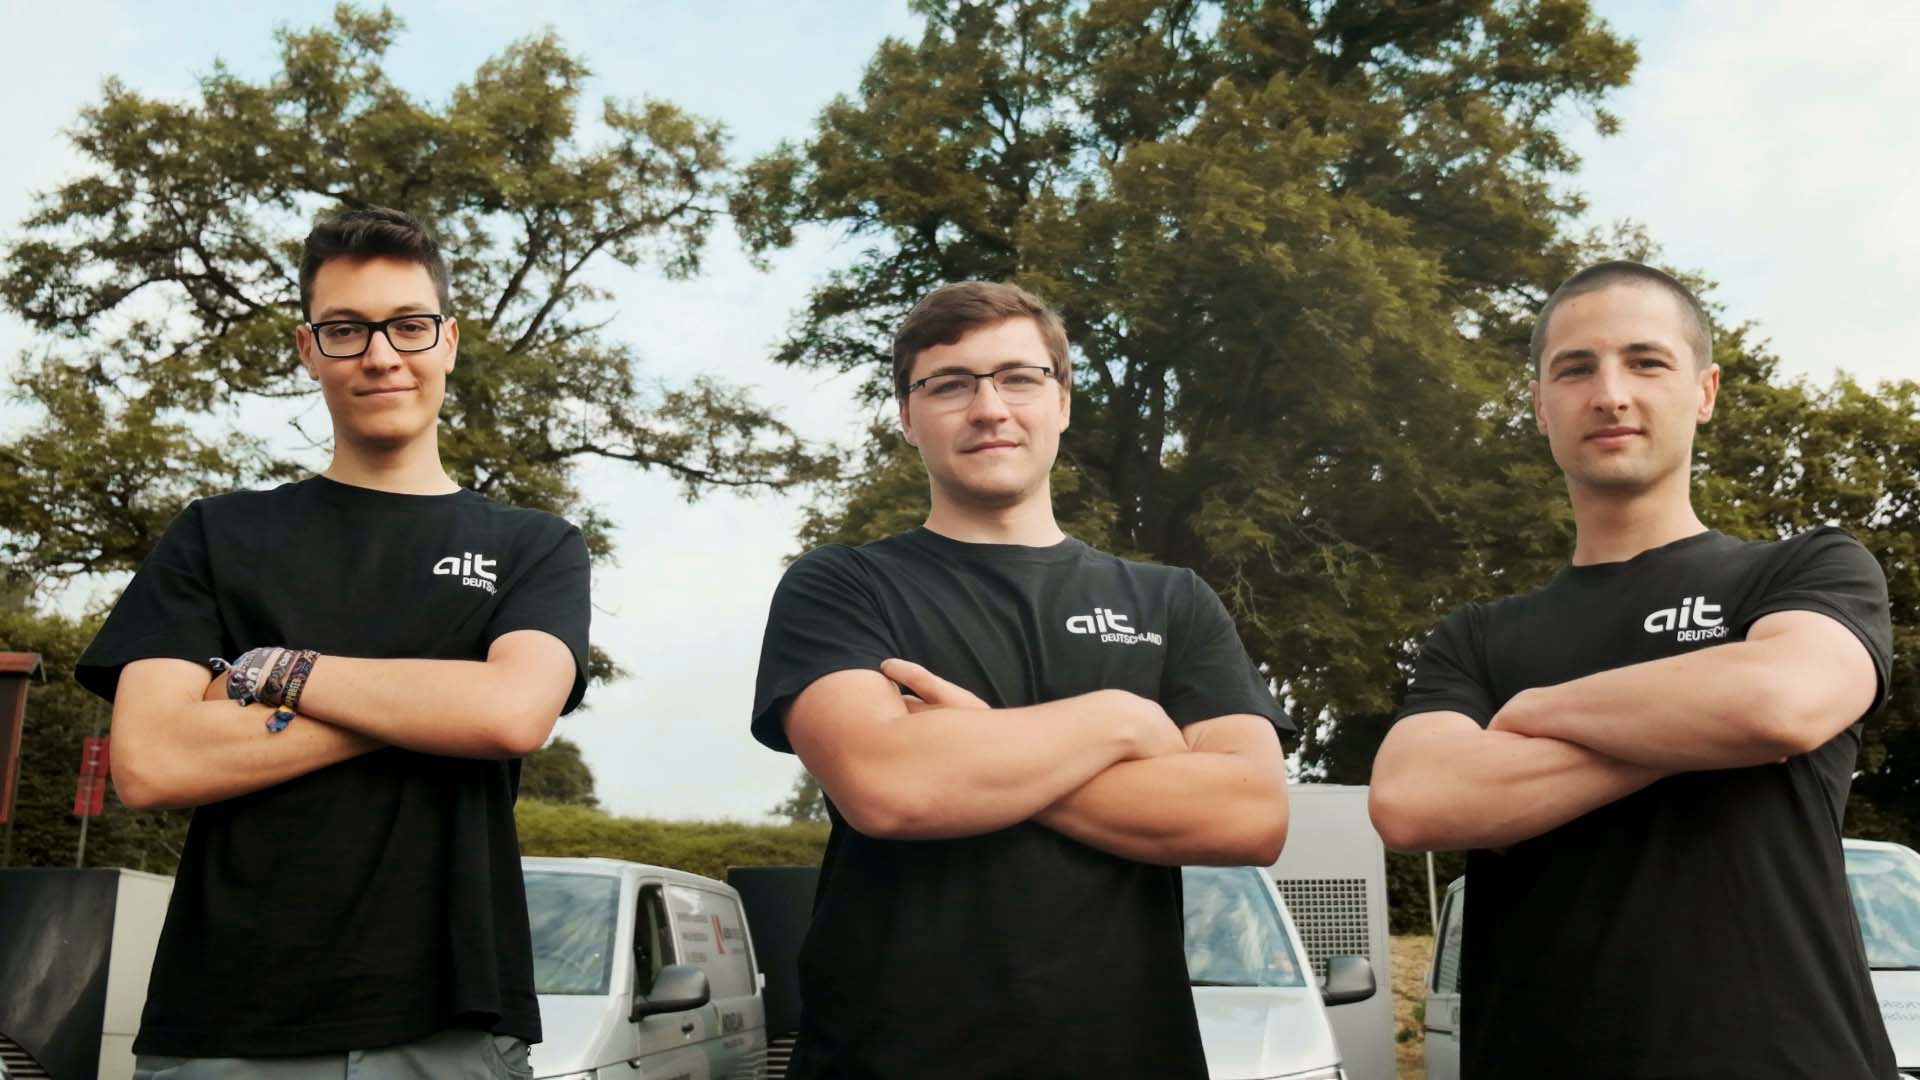 Three young men stand with their arms crossed and look at the camera with a serious expression. In the background, there are ait service buses, with heat pumps behind them. Further back, some green meadow and trees can be seen.